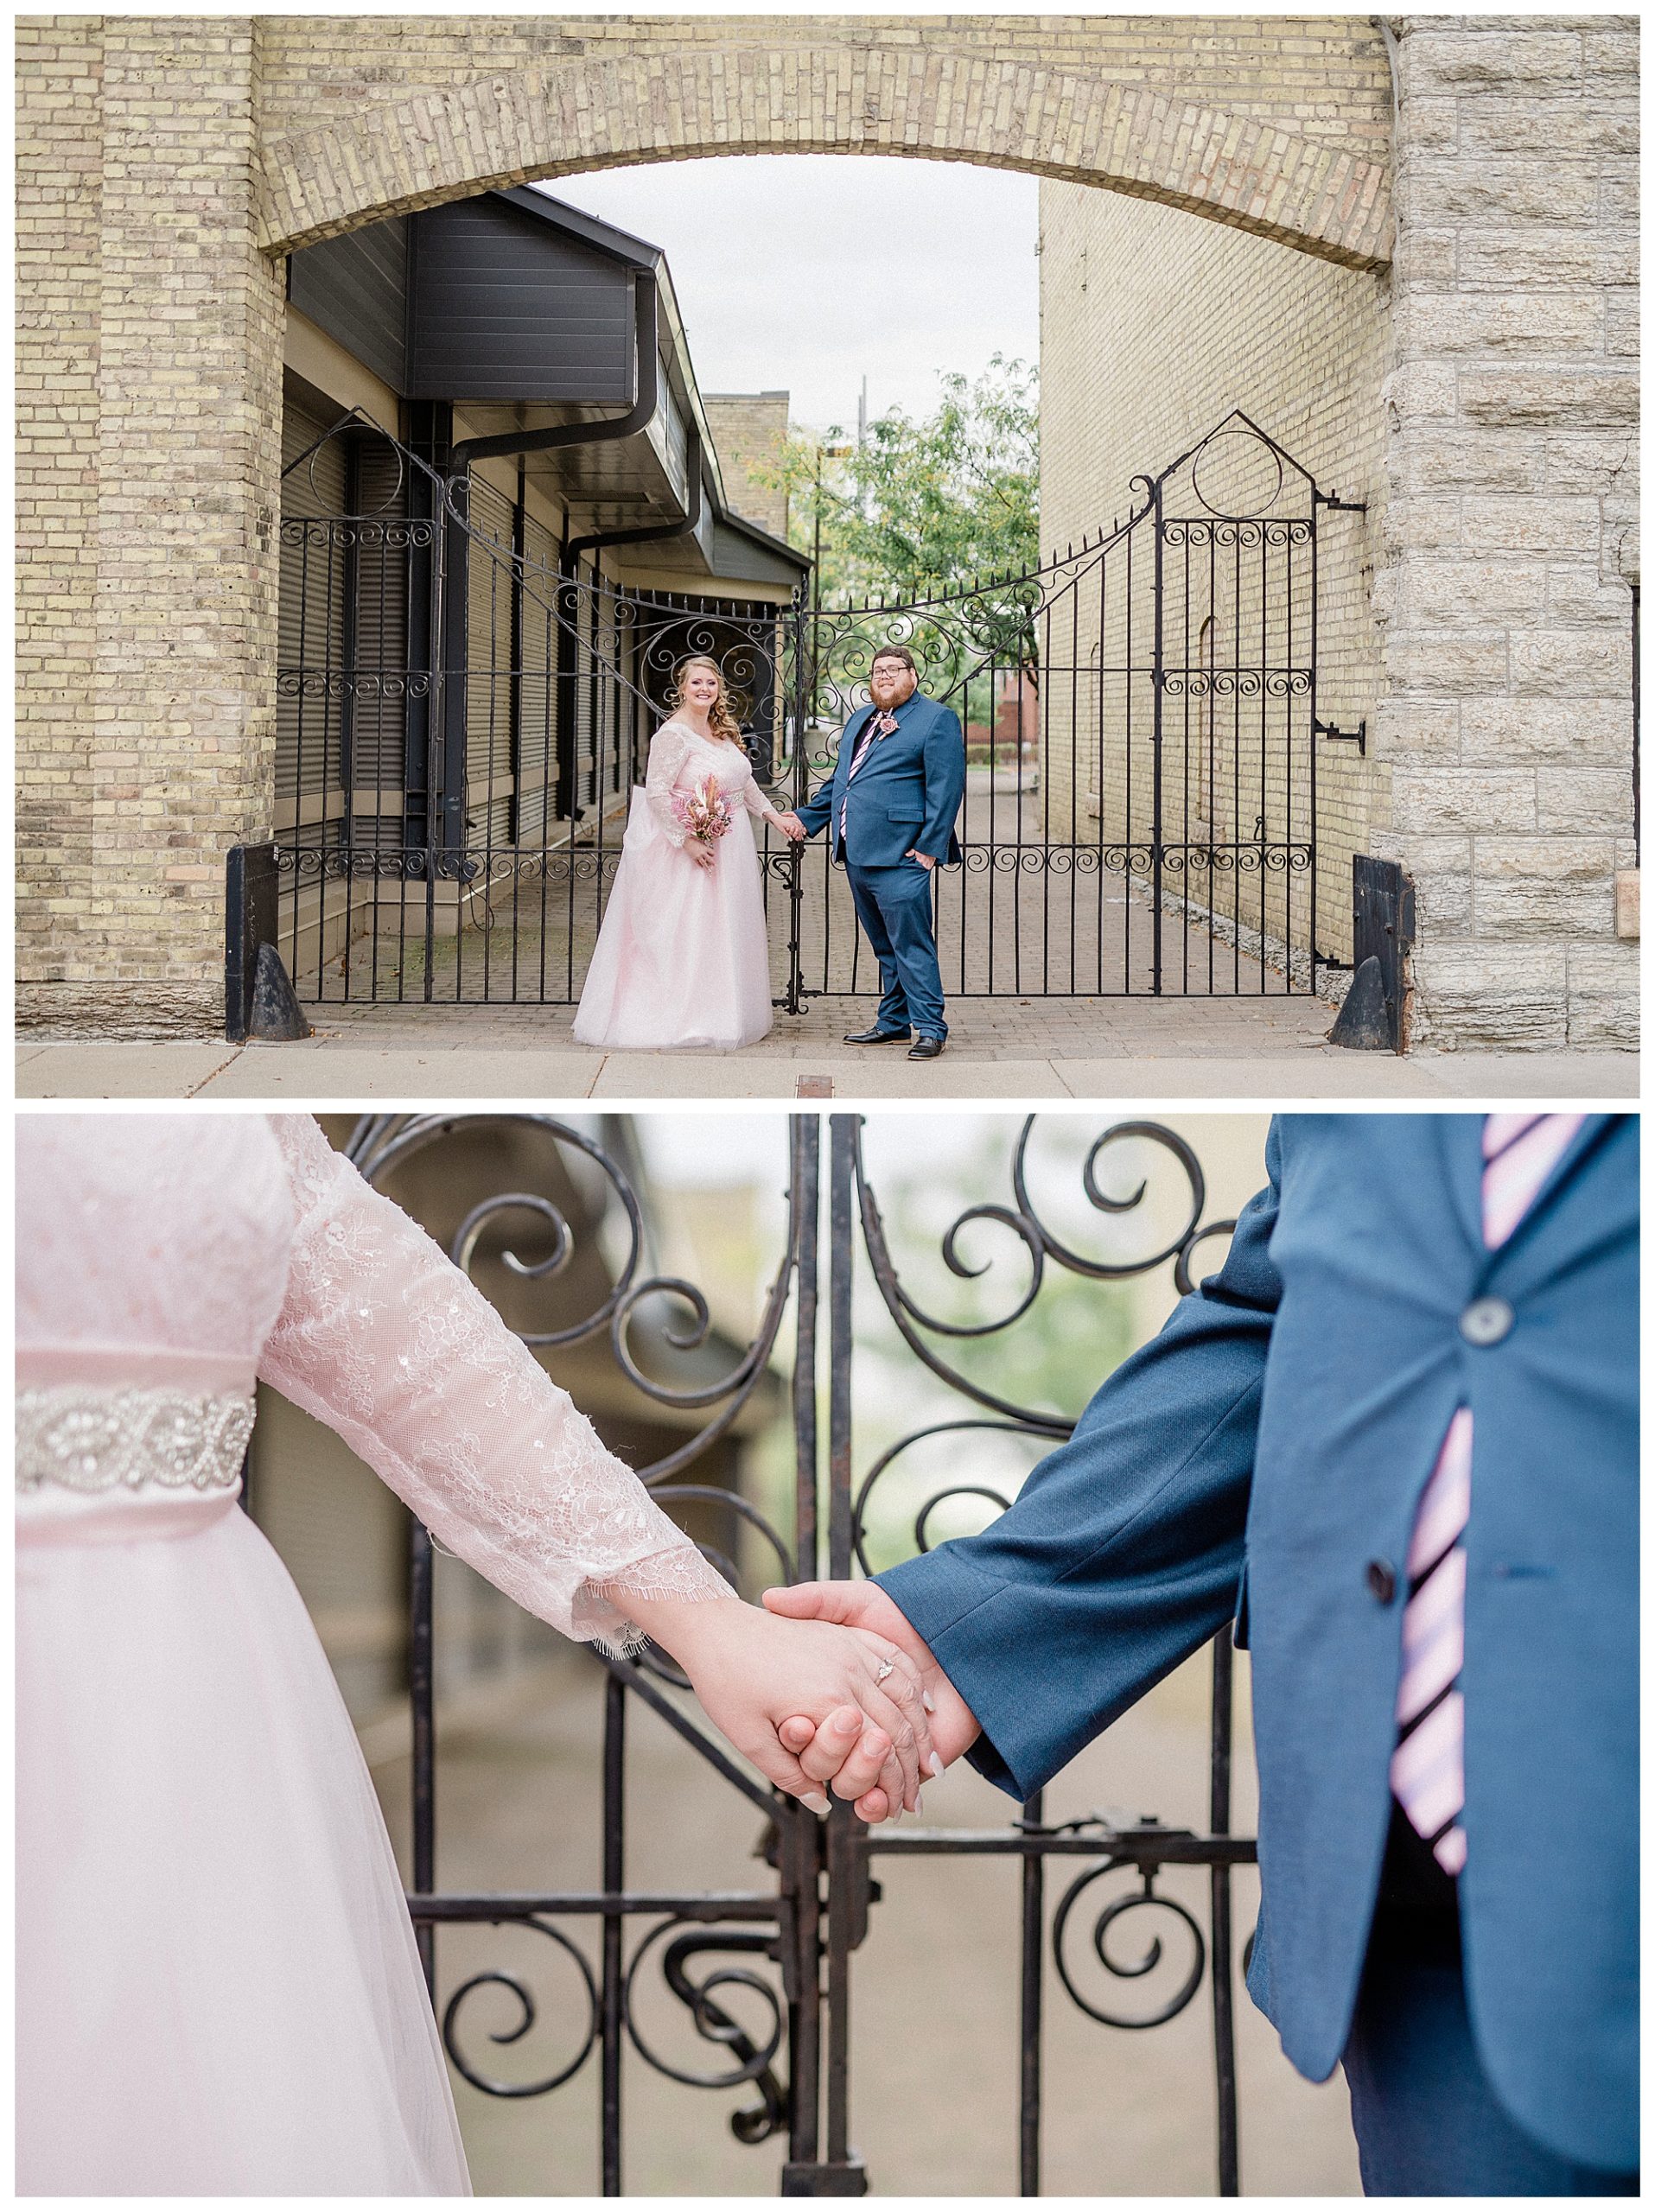 Bride and groom portraits for a Minneapolis wedding